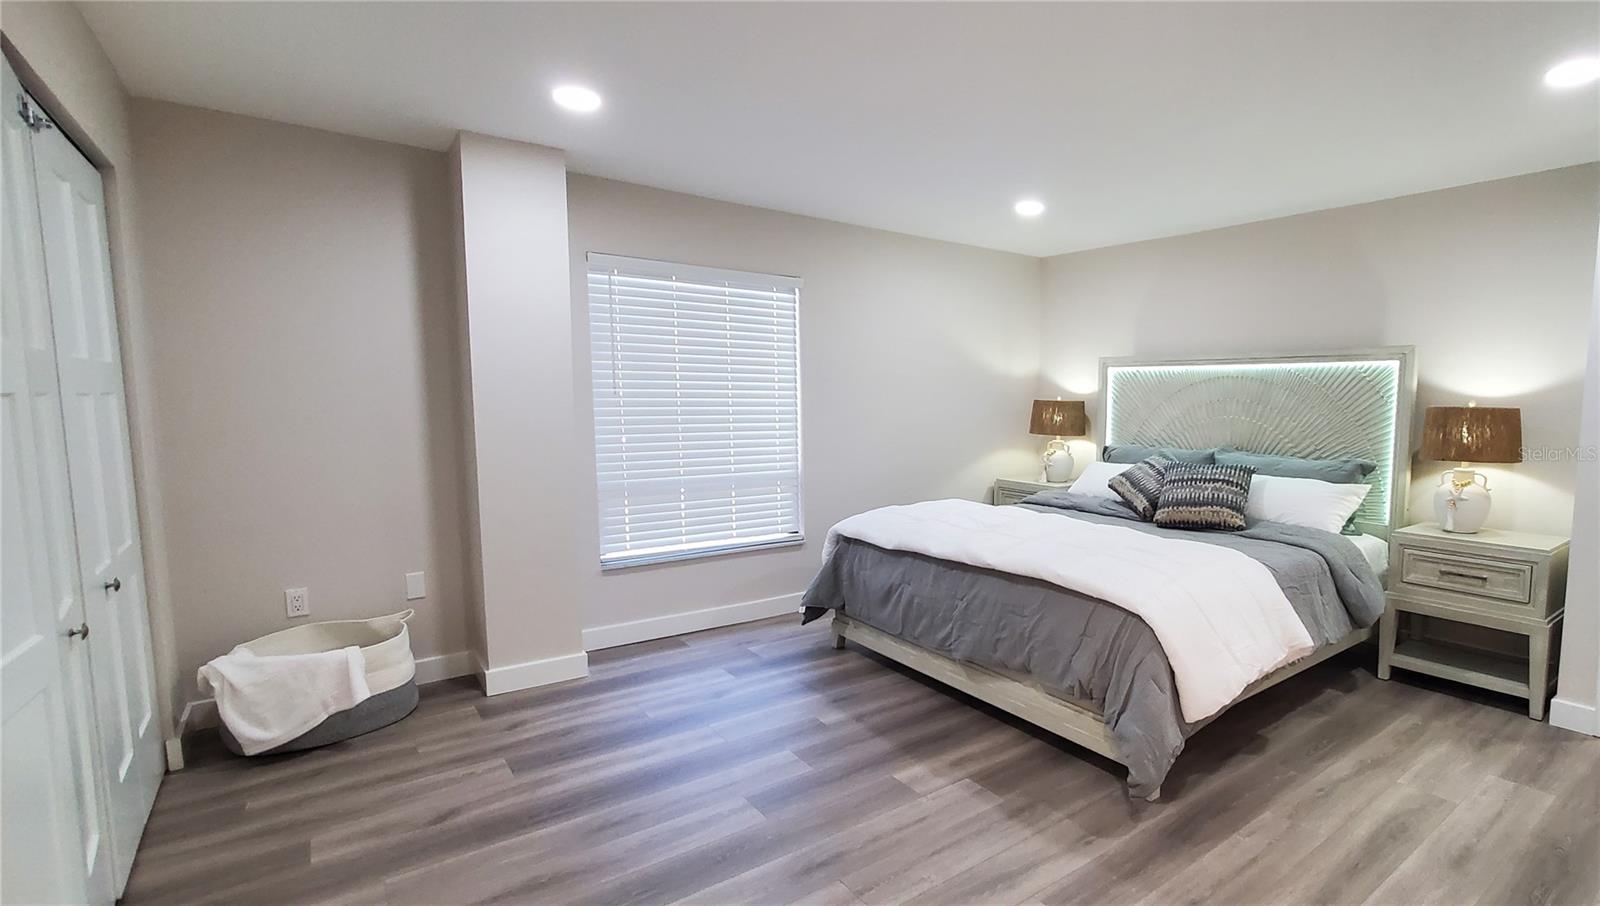 Huge master suite with plenty of storage and locked owner's closet